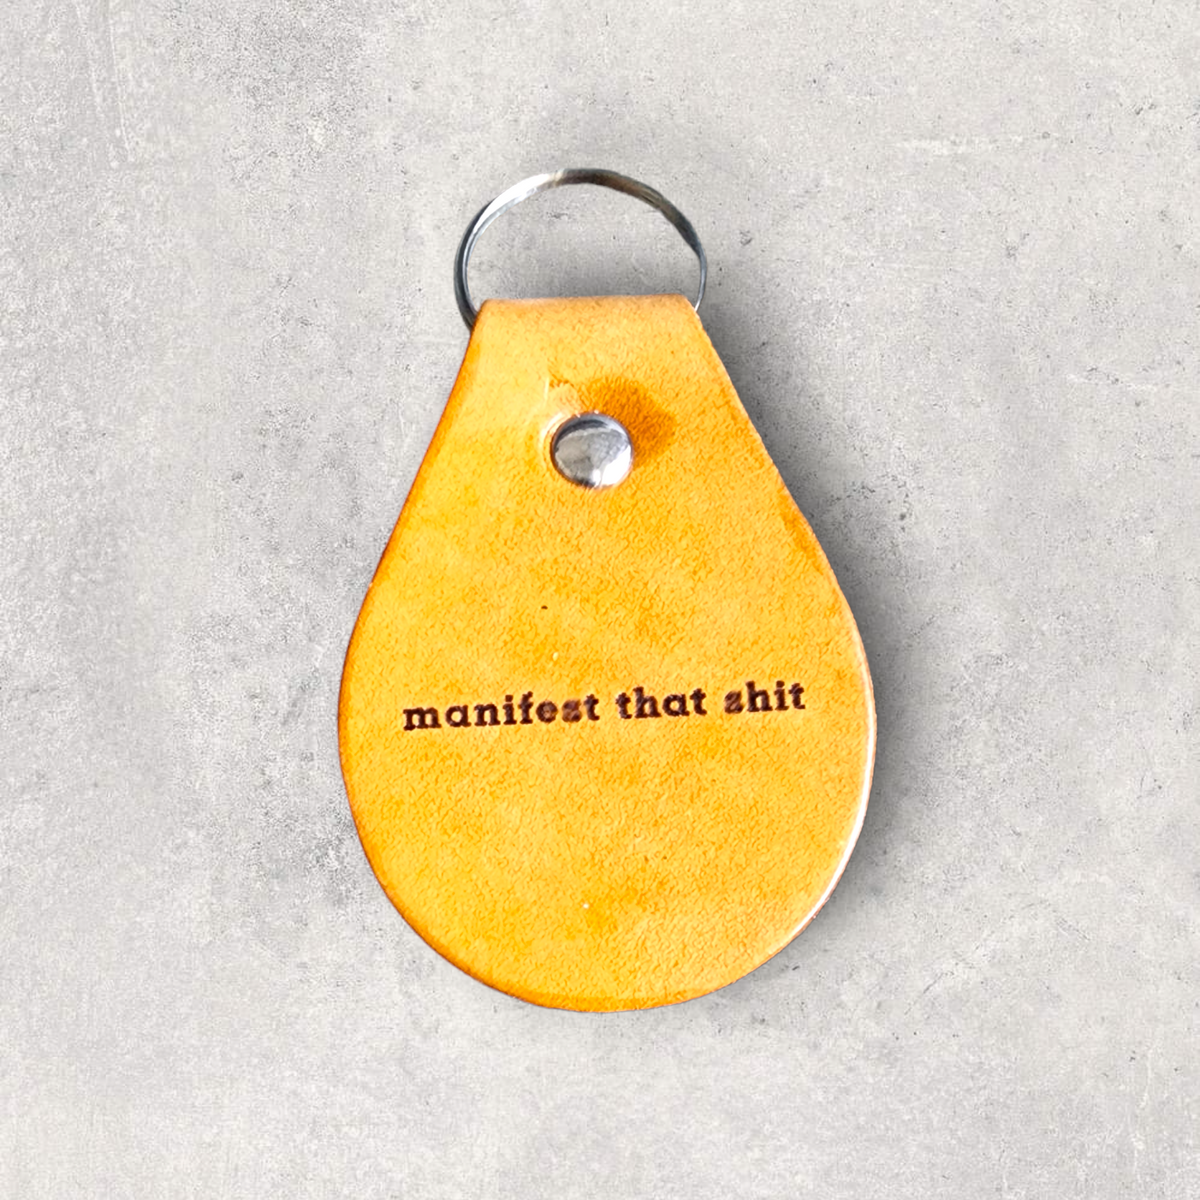 Engraved Leather Keychain - manifest that shit